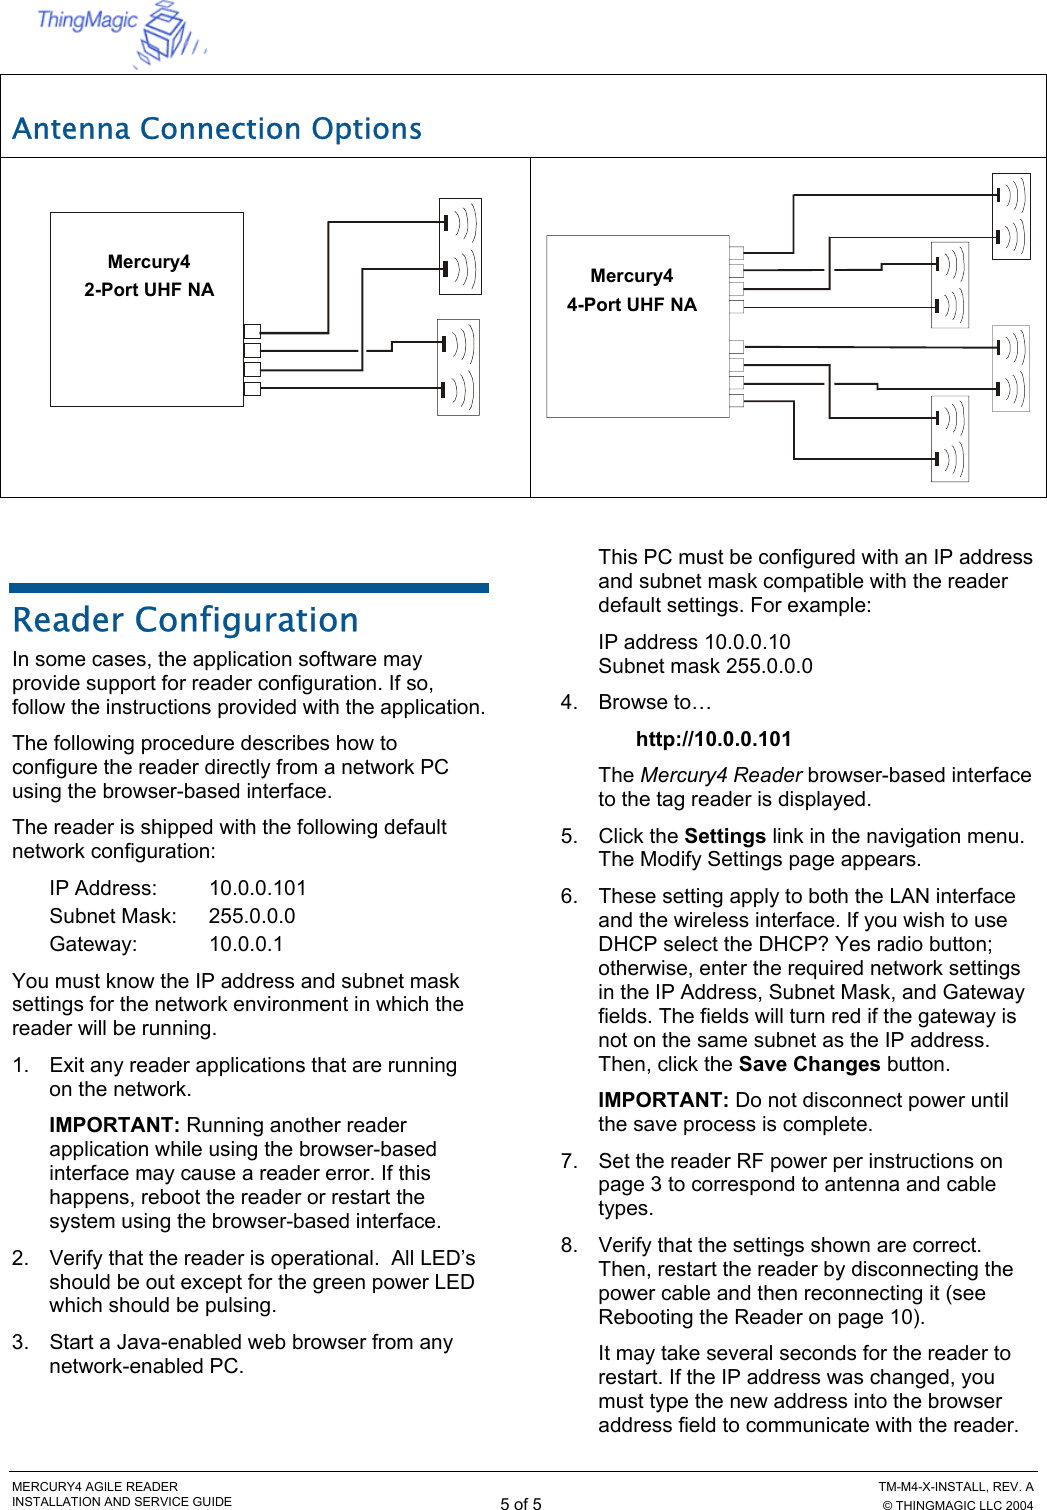  MERCURY4 AGILE READER    TM-M4-X-INSTALL, REV. A INSTALLATION AND SERVICE GUIDE 5 of 5  © THINGMAGIC LLC 2004 Antenna Connection Options     Reader Configuration In some cases, the application software may provide support for reader configuration. If so, follow the instructions provided with the application. The following procedure describes how to configure the reader directly from a network PC using the browser-based interface. The reader is shipped with the following default network configuration: IP Address:   10.0.0.101 Subnet Mask:  255.0.0.0 Gateway: 10.0.0.1 You must know the IP address and subnet mask settings for the network environment in which the reader will be running. 1.  Exit any reader applications that are running on the network. IMPORTANT: Running another reader application while using the browser-based interface may cause a reader error. If this happens, reboot the reader or restart the system using the browser-based interface. 2.  Verify that the reader is operational.  All LED’s should be out except for the green power LED which should be pulsing. 3.  Start a Java-enabled web browser from any network-enabled PC. This PC must be configured with an IP address and subnet mask compatible with the reader default settings. For example:  IP address 10.0.0.10 Subnet mask 255.0.0.0 4. Browse to… http://10.0.0.101 The Mercury4 Reader browser-based interface to the tag reader is displayed. 5. Click the Settings link in the navigation menu. The Modify Settings page appears. 6.  These setting apply to both the LAN interface and the wireless interface. If you wish to use DHCP select the DHCP? Yes radio button; otherwise, enter the required network settings in the IP Address, Subnet Mask, and Gateway fields. The fields will turn red if the gateway is not on the same subnet as the IP address. Then, click the Save Changes button. IMPORTANT: Do not disconnect power until the save process is complete. 7.  Set the reader RF power per instructions on page 3 to correspond to antenna and cable types. 8.  Verify that the settings shown are correct. Then, restart the reader by disconnecting the power cable and then reconnecting it (see Rebooting the Reader on page 10). It may take several seconds for the reader to restart. If the IP address was changed, you must type the new address into the browser address field to communicate with the reader. Mercury4 2-Port UHF NA  Mercury44-Port UHF NA 